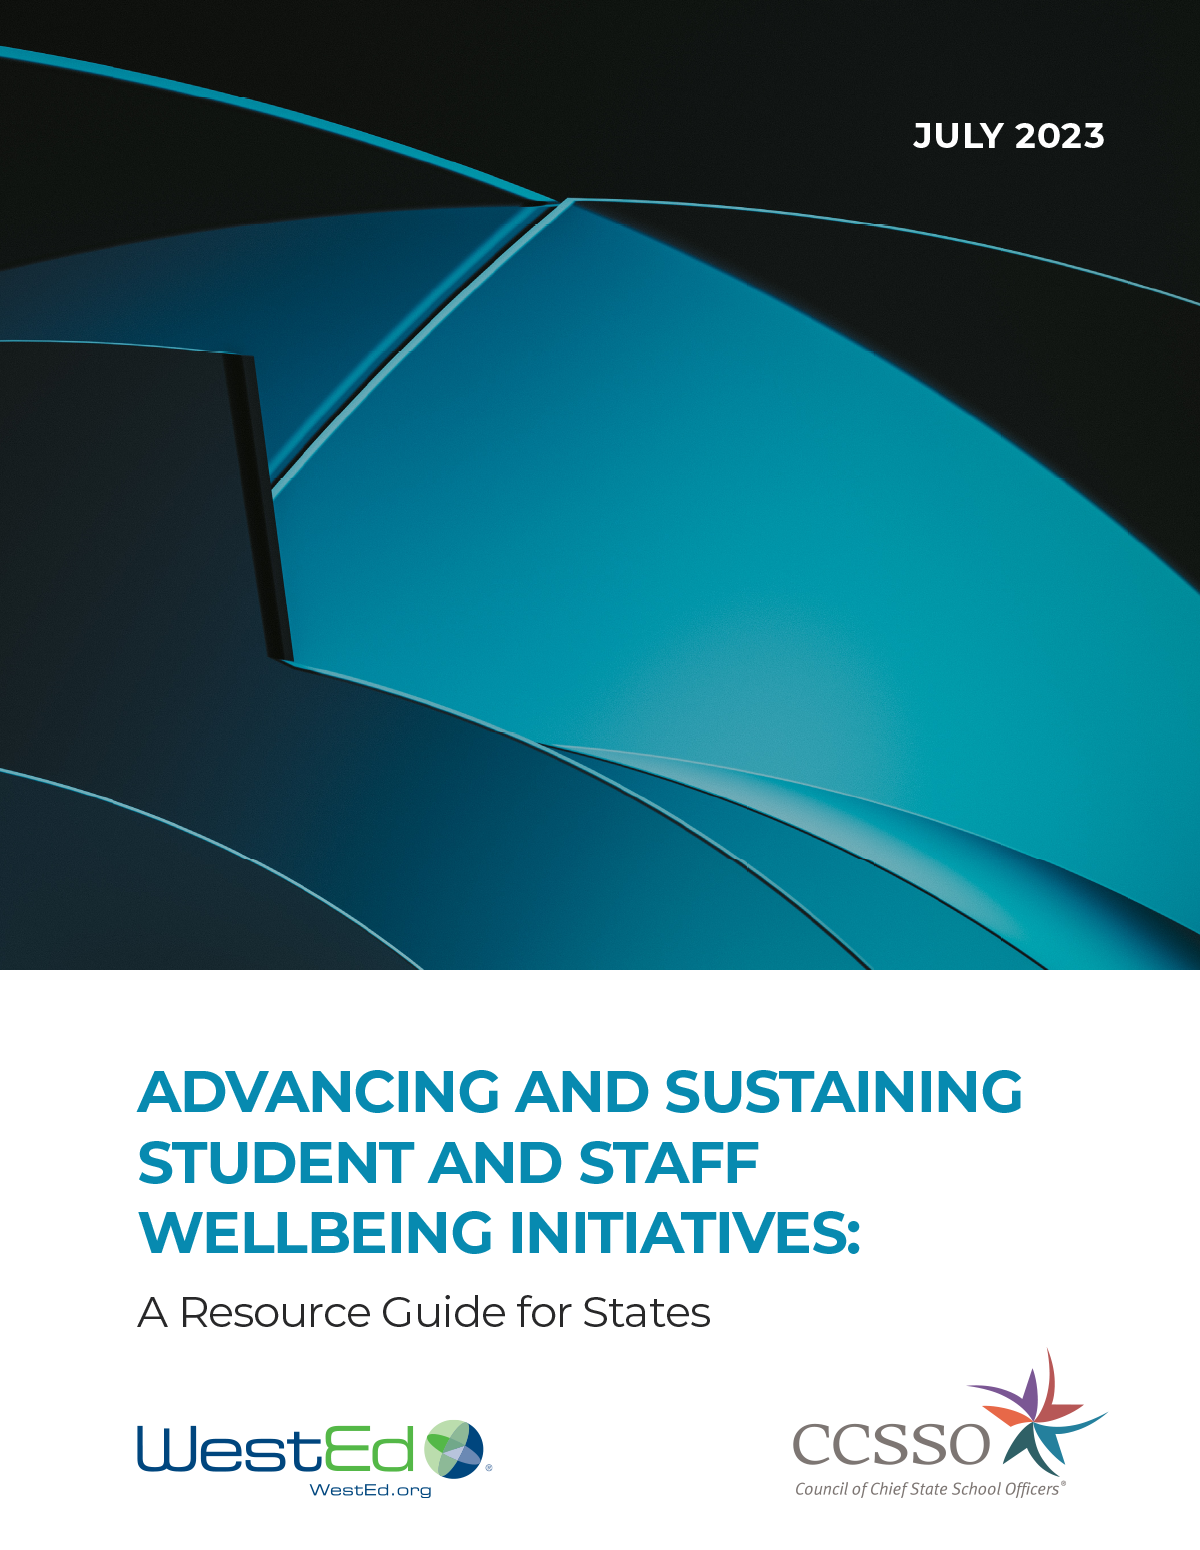 Advancing and Sustaining Student and Staff Wellbeing Initiatives: A Resource Guide for States